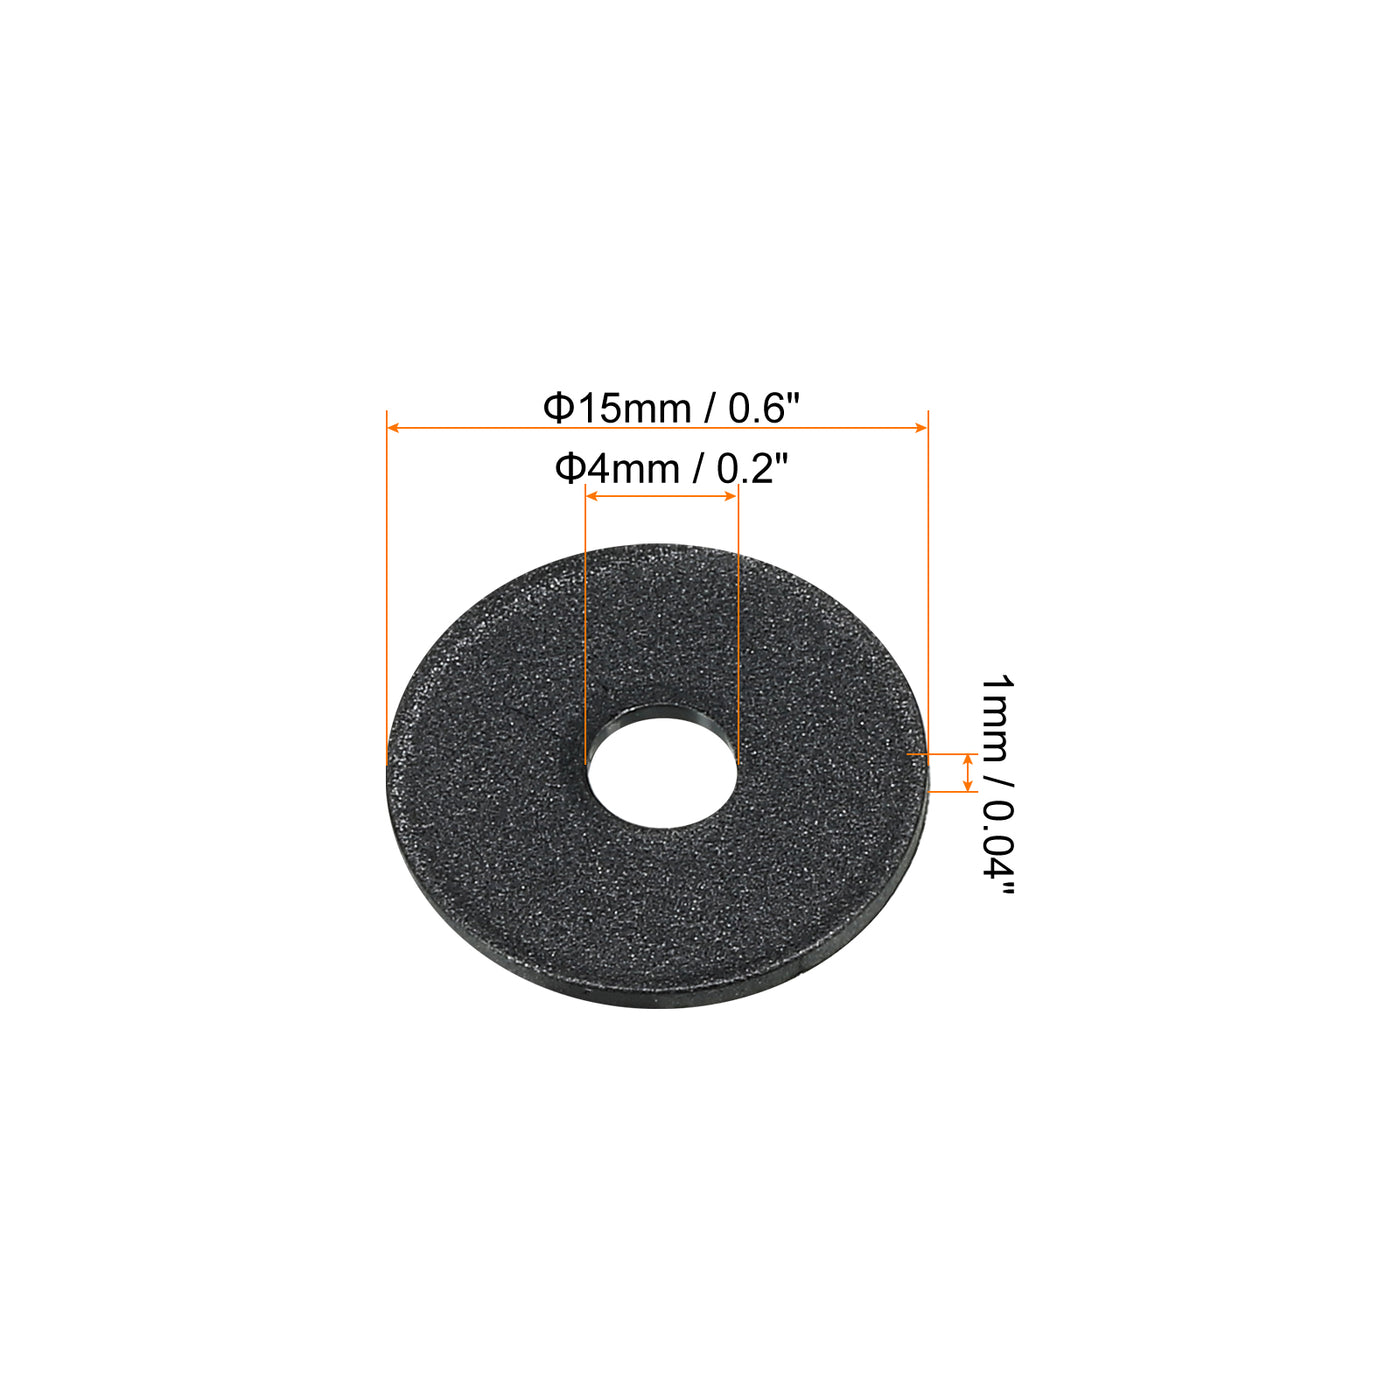 Harfington M4 Nylon Flat Washer, 100pcs 4mm ID 15mm OD 1mm Thick Sealing Spacer Gasket